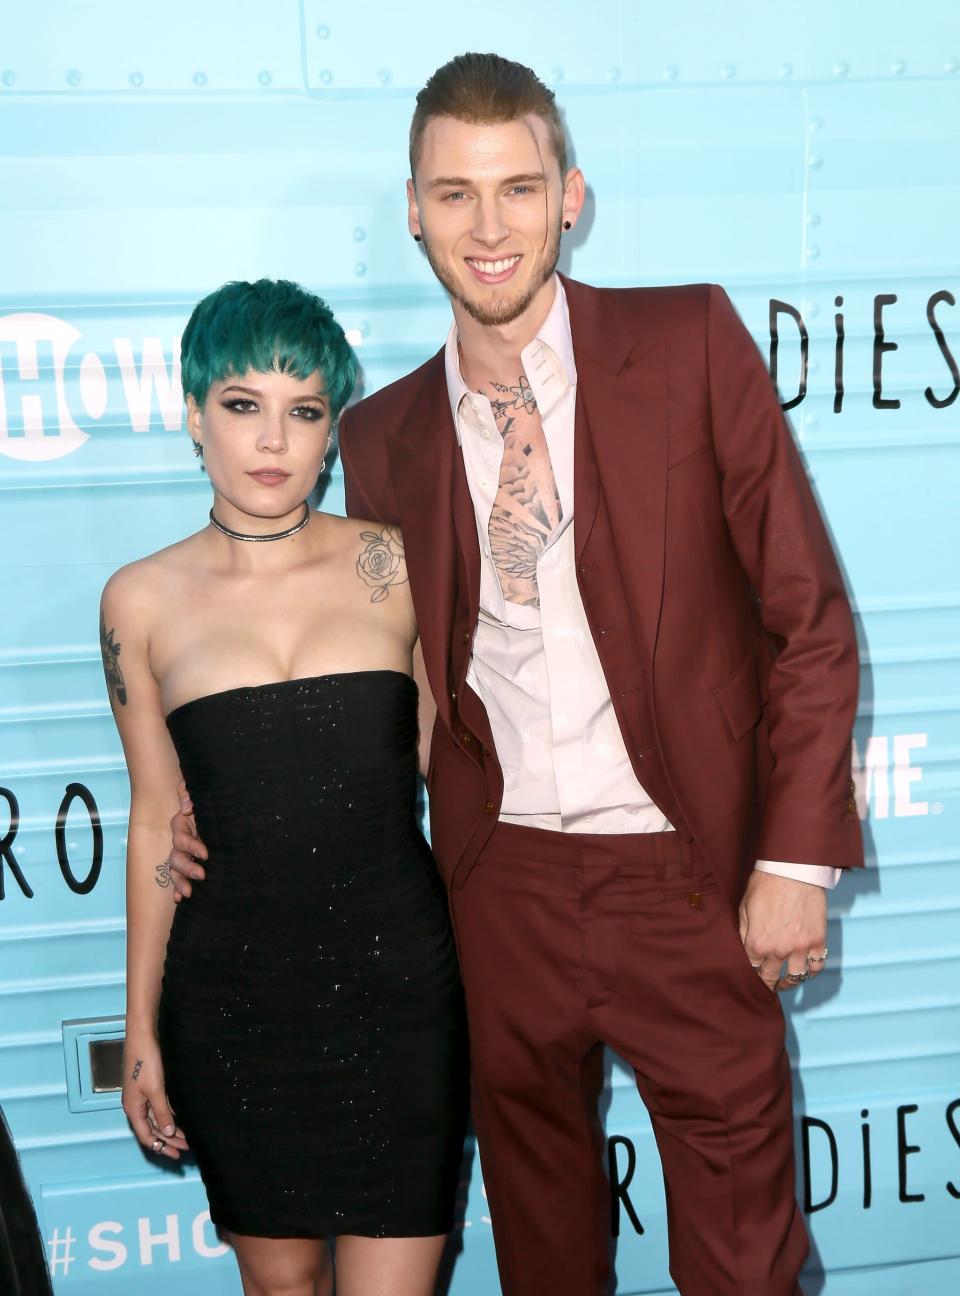 <p>The rapper was linked to Halsey in March 2017 when they were spotted at the beach together. <a href="https://twitter.com/PopCrave/status/1016354765058592774?s=20" class="link " rel="nofollow noopener" target="_blank" data-ylk="slk:Photos of their tropical outing">Photos of their tropical outing</a> resurfaced in July 2018, <a href="https://www.billboard.com/articles/news/8464524/halsey-machine-gun-kelly-dating-rumors" class="link " rel="nofollow noopener" target="_blank" data-ylk="slk:prompting Halsey to deny dating rumors">prompting Halsey to deny dating rumors</a>. Two months after she debunked the relationship, MGK confirmed in <a href="https://youtu.be/Le0u232ODx8" class="link " rel="nofollow noopener" target="_blank" data-ylk="slk:an interview with &quot;The Breakfast Club">an interview with "The Breakfast Club</a>" that they weren't dating but had previously been intimate. In September 2020, the pair reunited for their song "<a href="http://www.youtube.com/watch?v=7gVNNPv8w4Q" class="link " rel="nofollow noopener" target="_blank" data-ylk="slk:Forget Me Too">Forget Me Too</a>."</p>